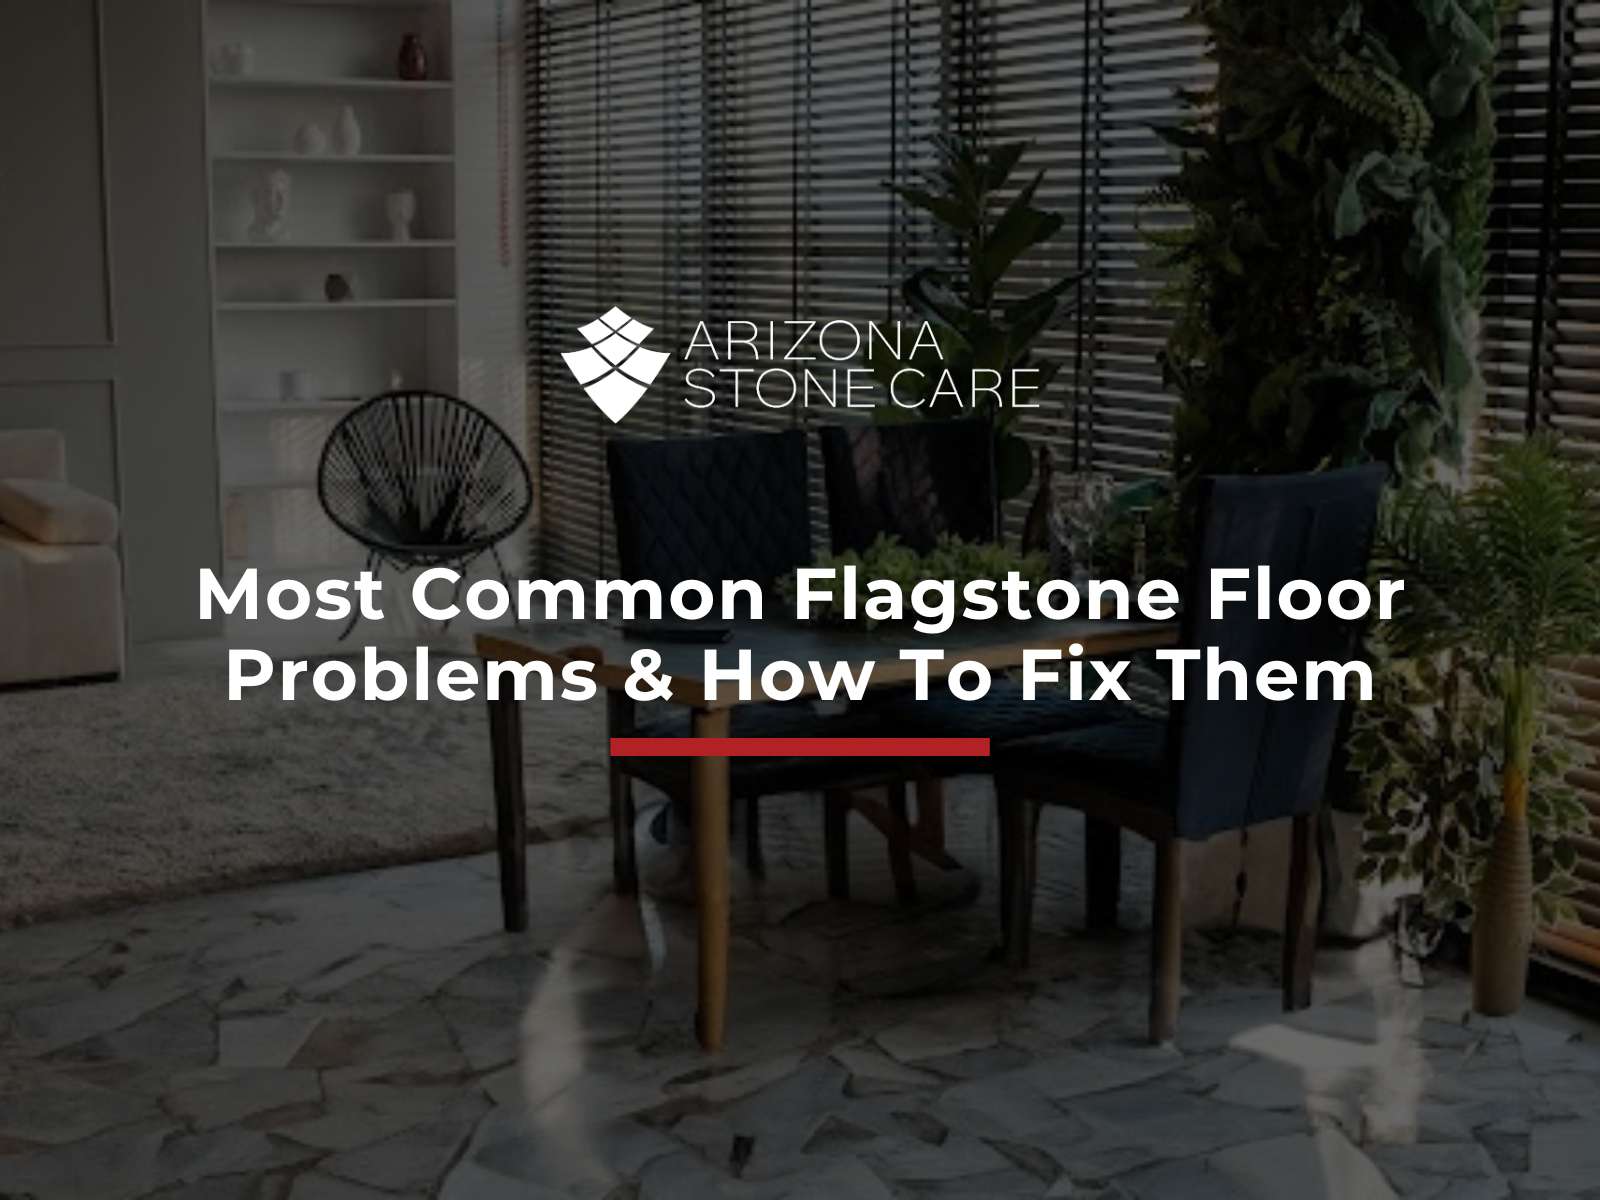 Most Common Flagstone Floor Problems & How To Fix Them